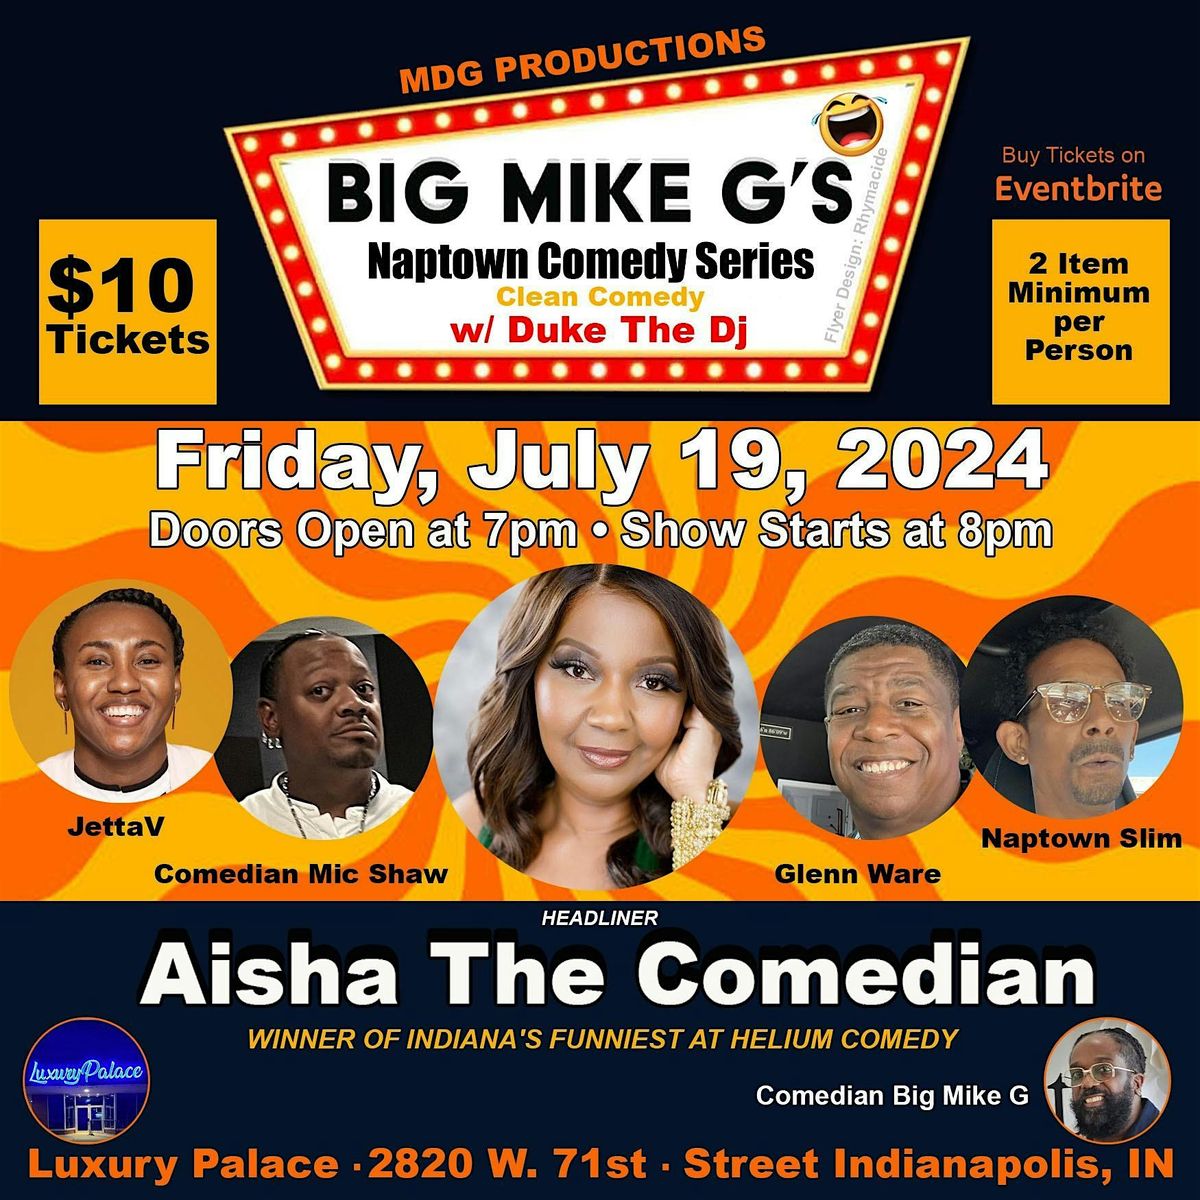 BIG MIKE G'S NAPTOWN COMEDY SERIES